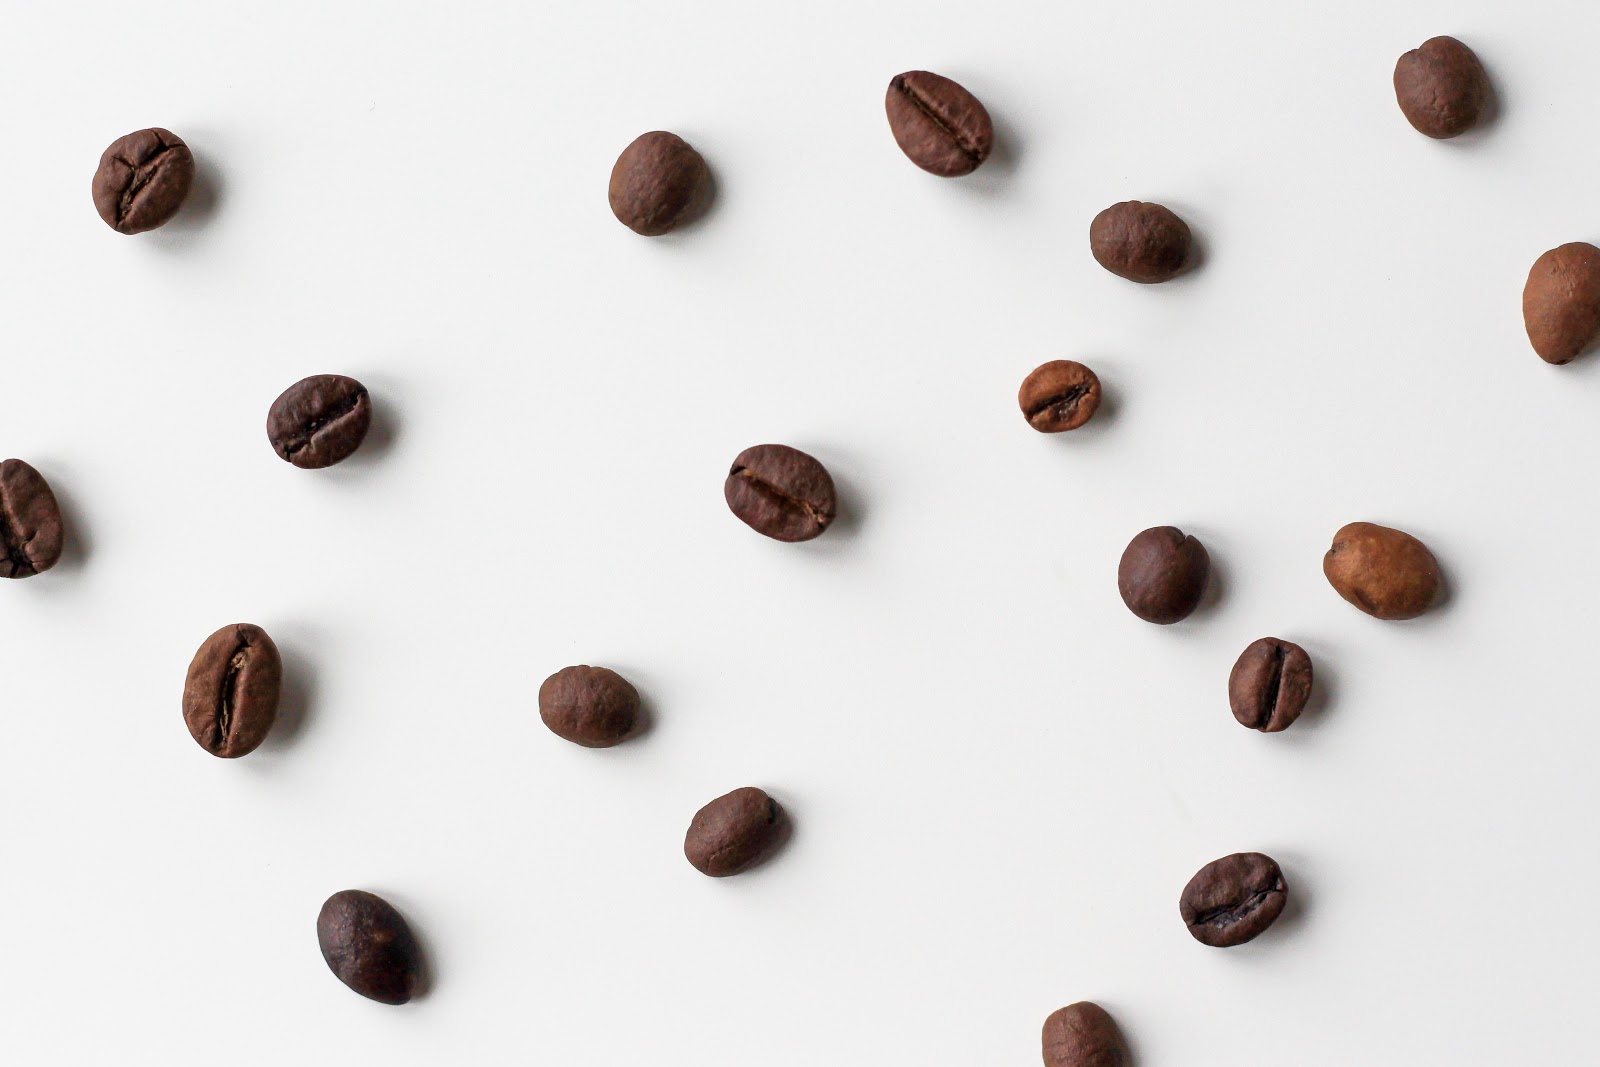 Single Origin Coffee: What Is It, and Is It Worth the Premium?